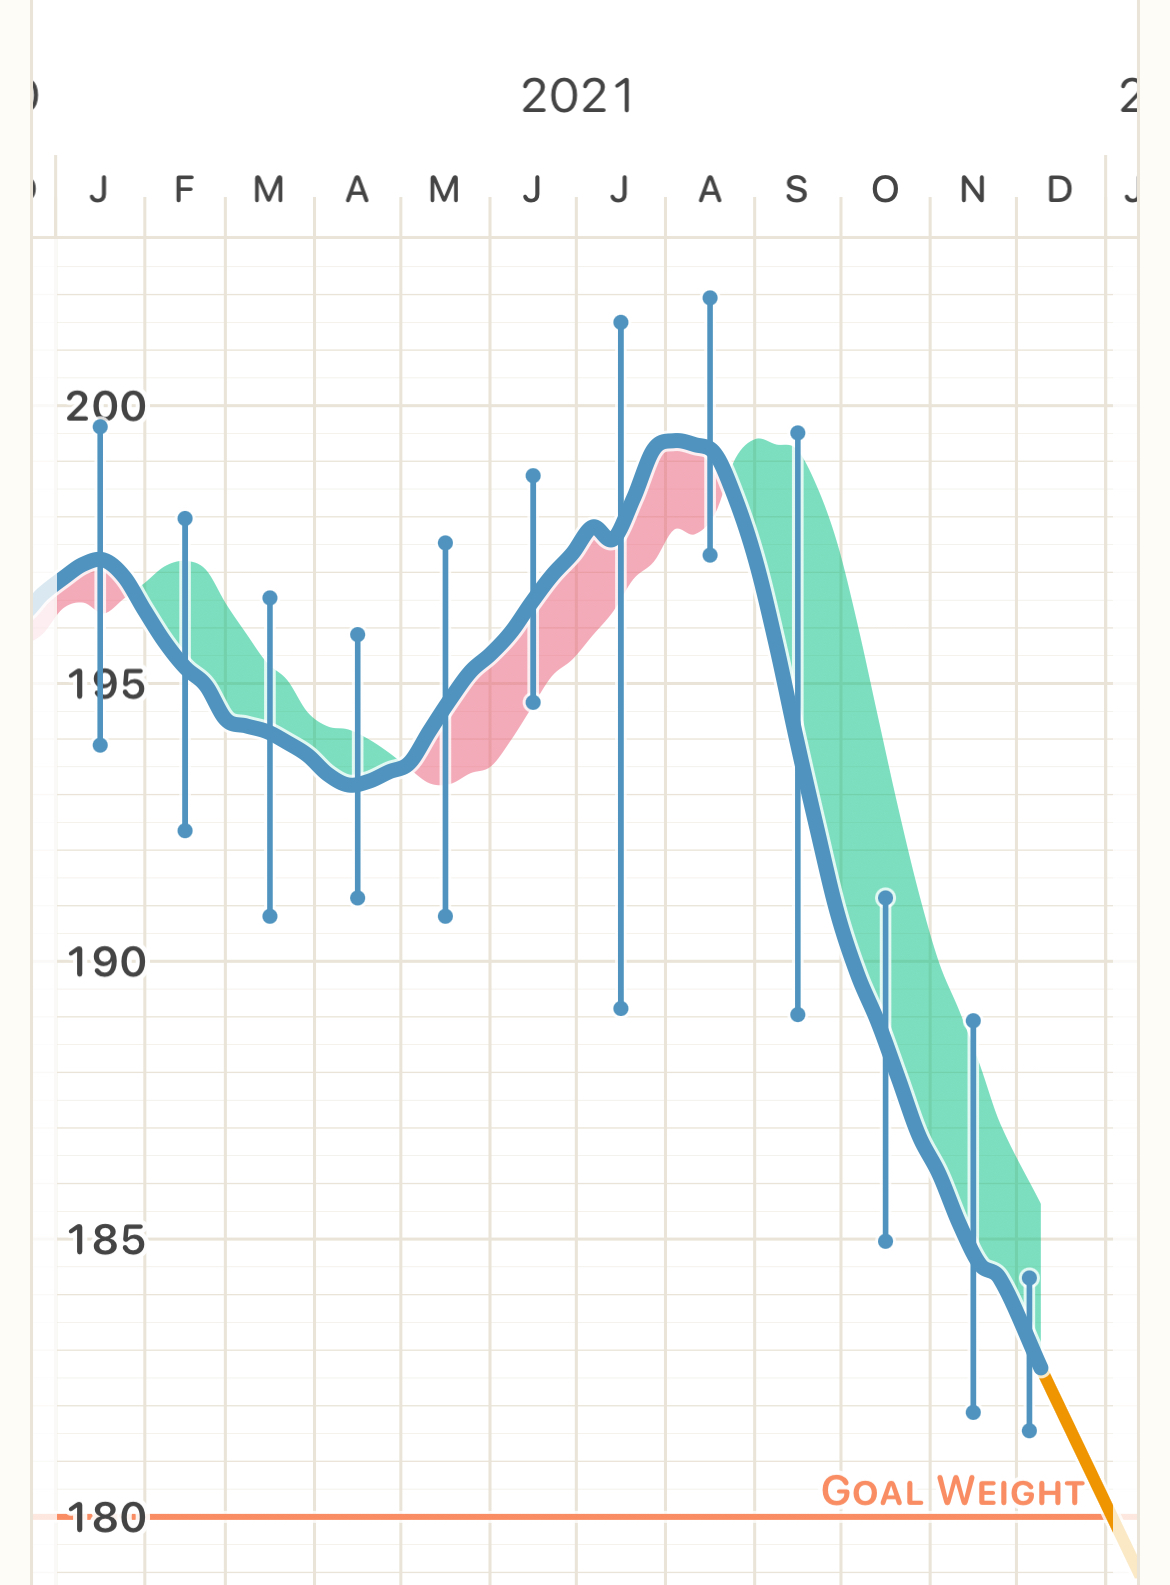 screen capture of weight loss graph showing 3-month reduction of weight from 200 to 180 pounds.